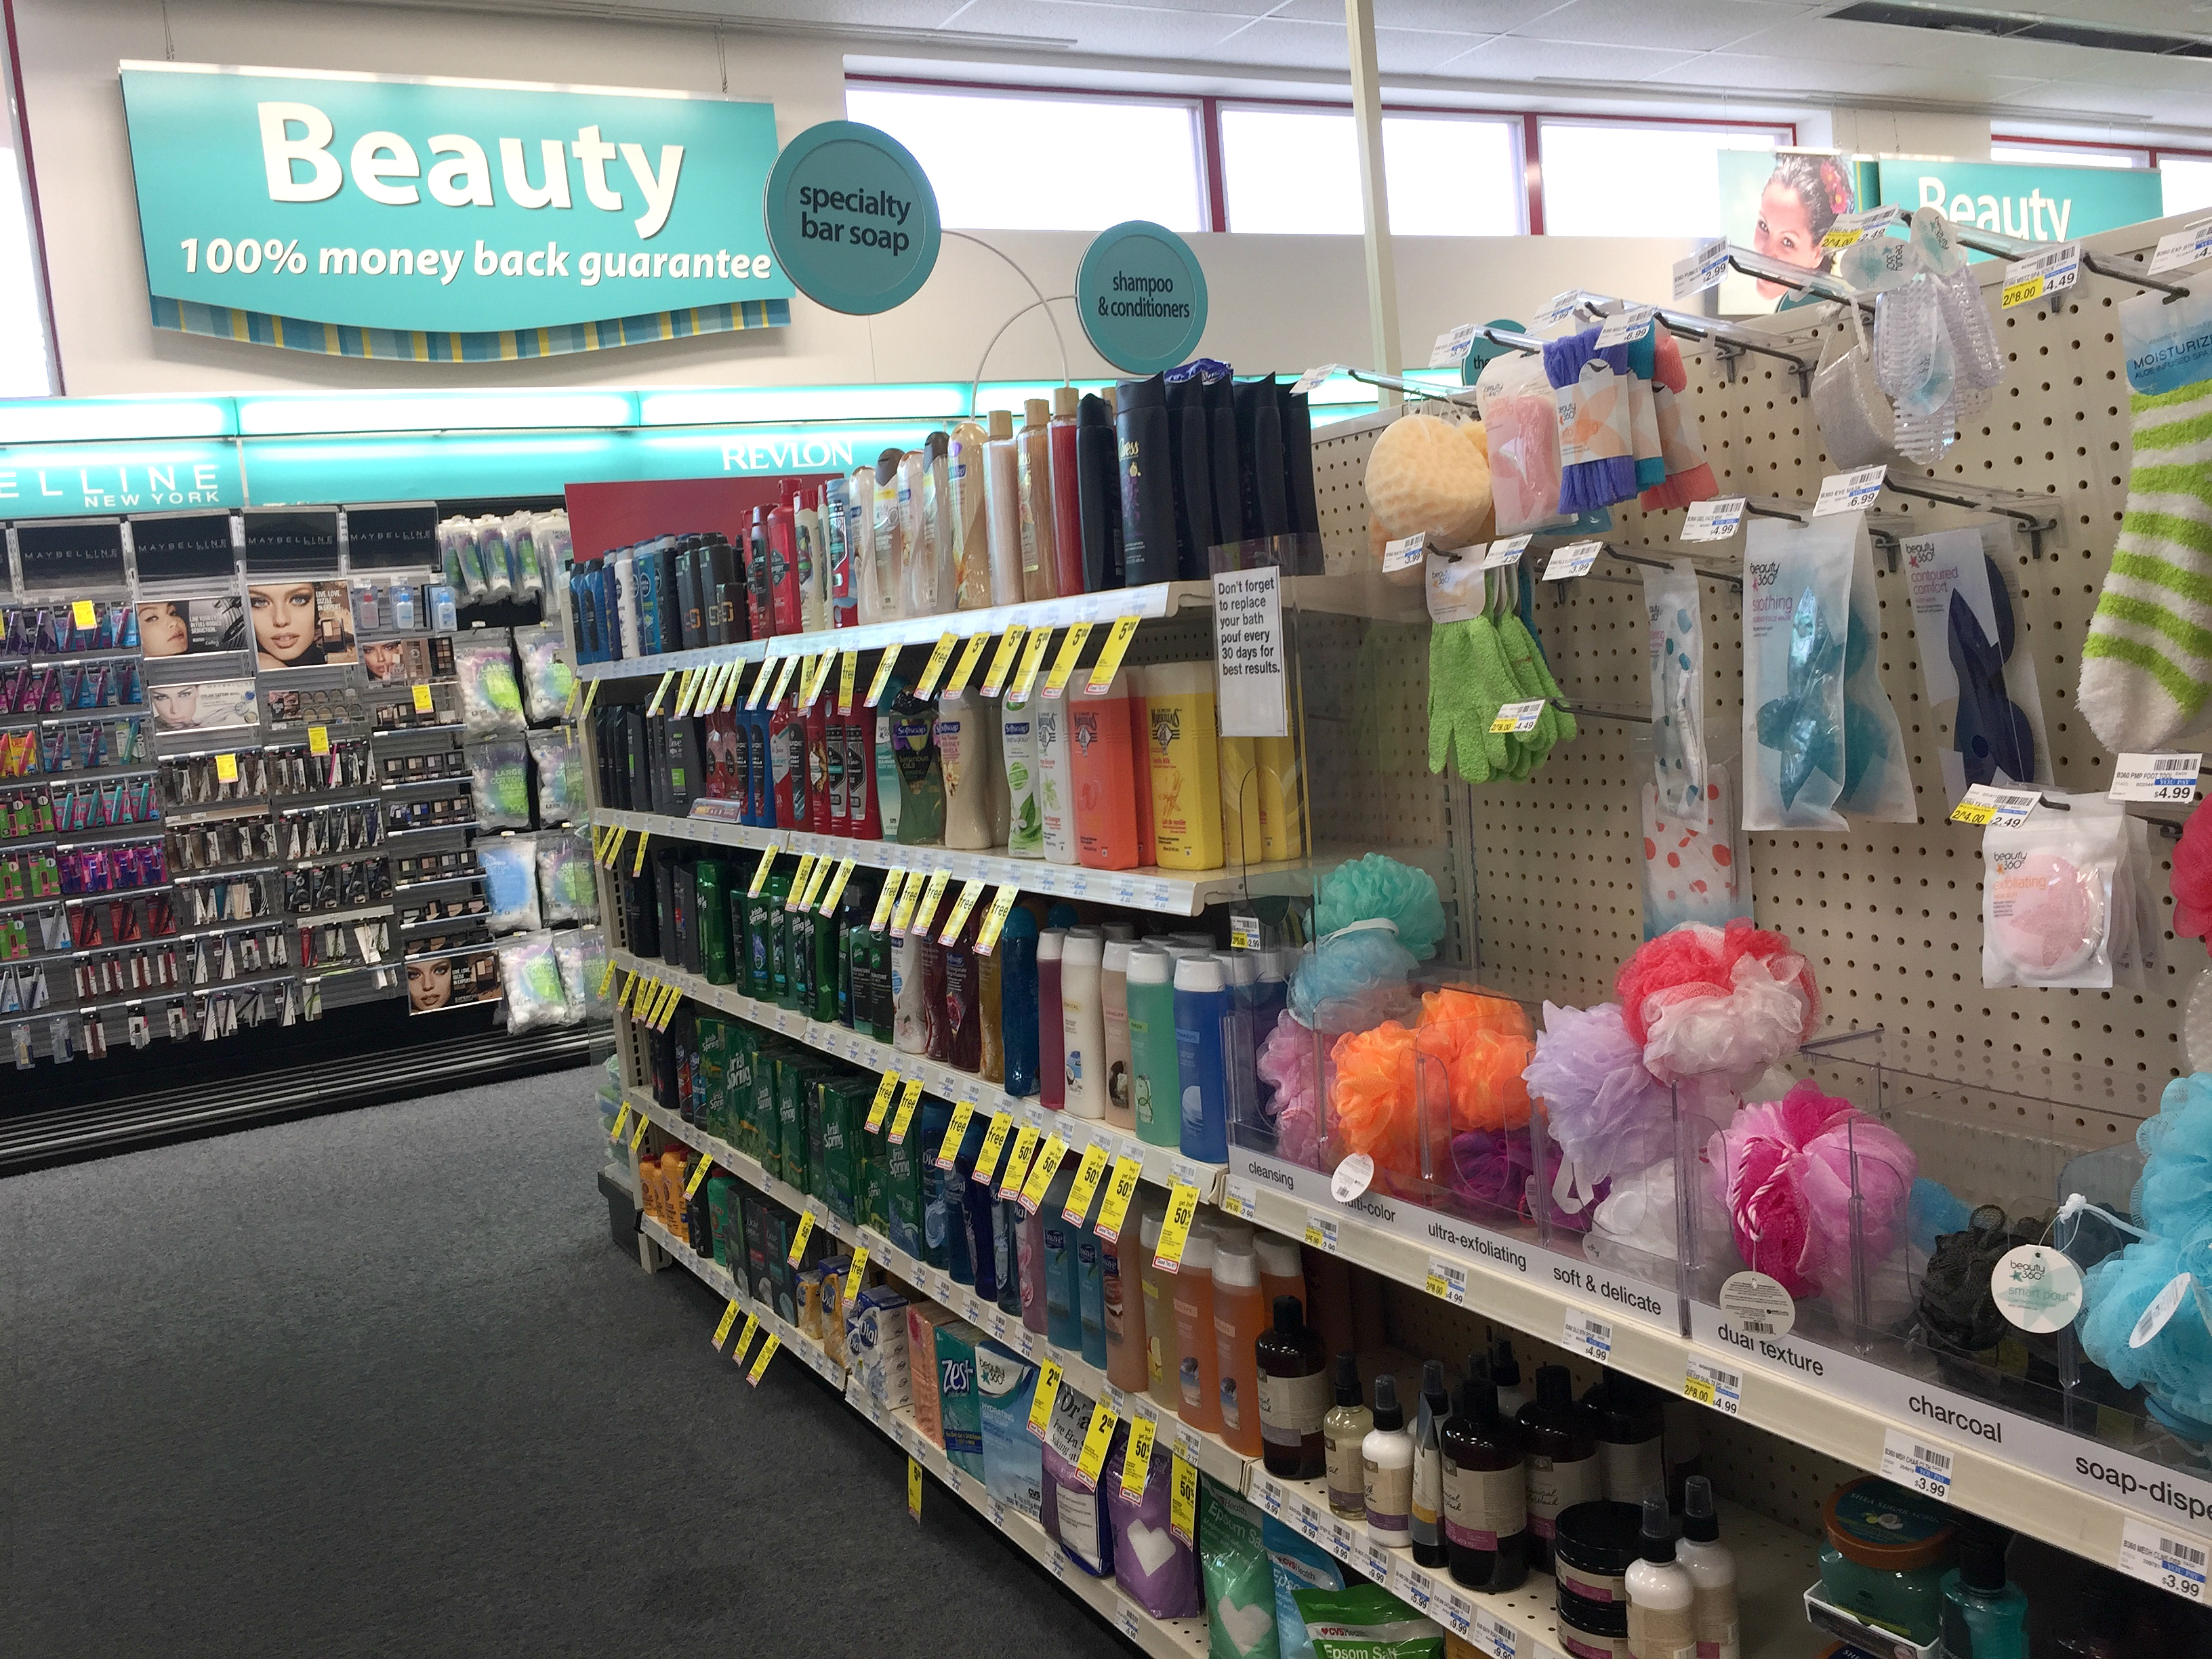 23 money saving tips you may not know about shopping at cvspharmacy – beauty aisles